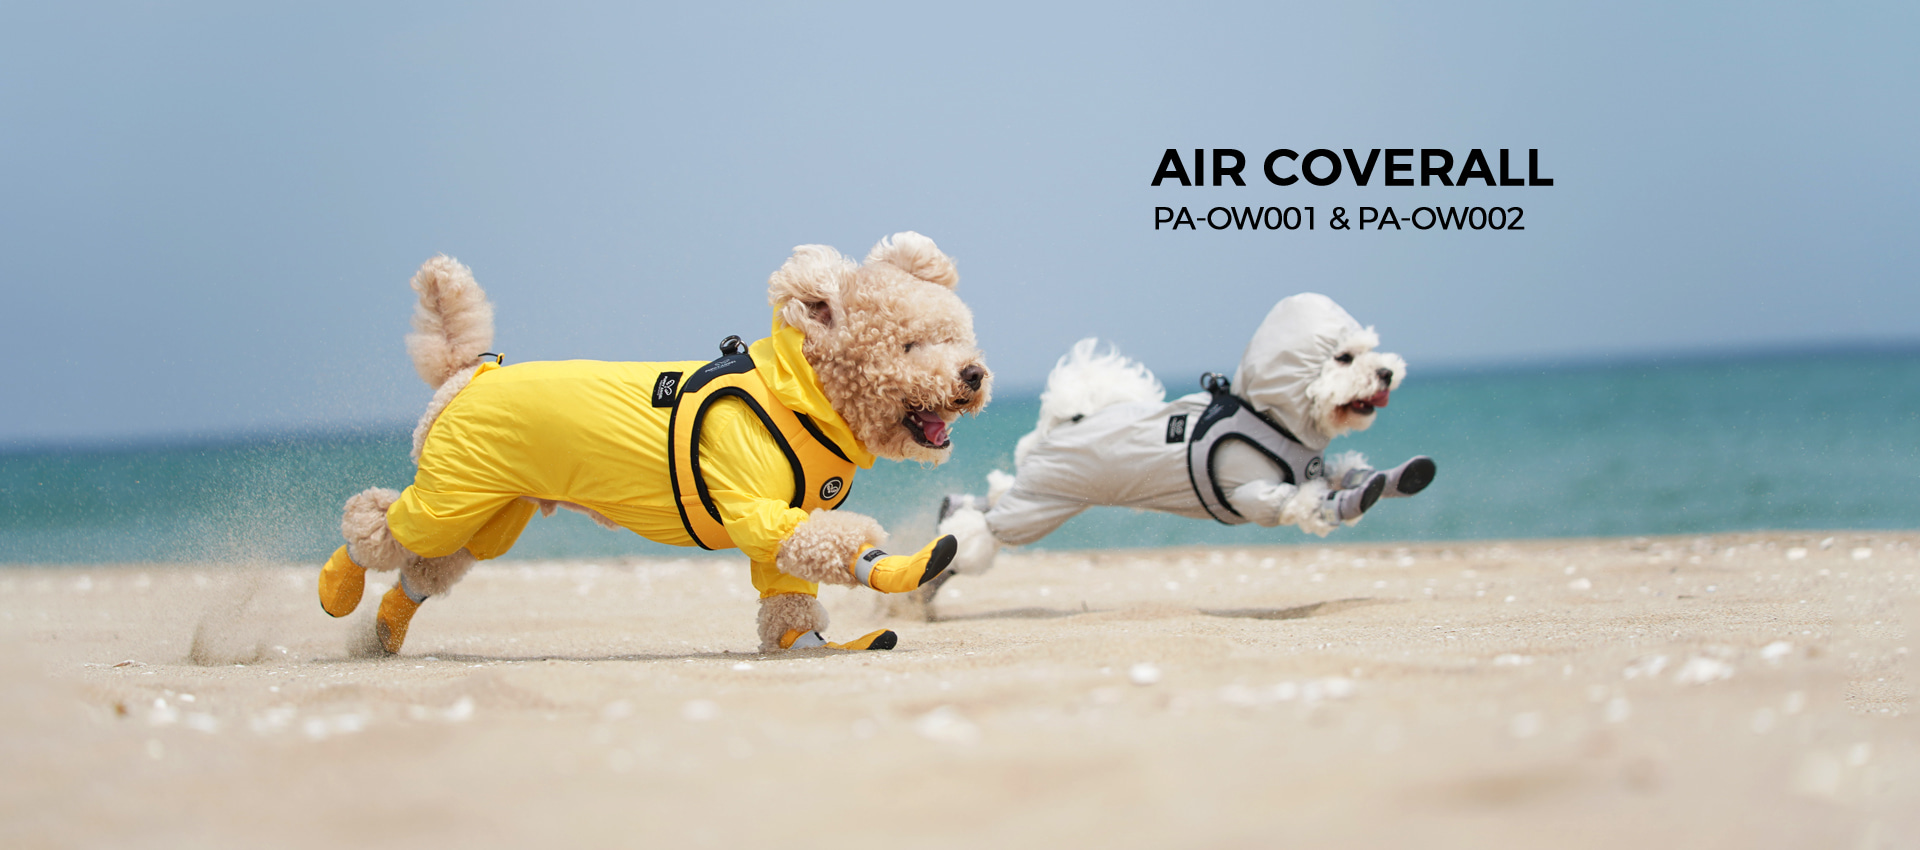 AIR COVERALL